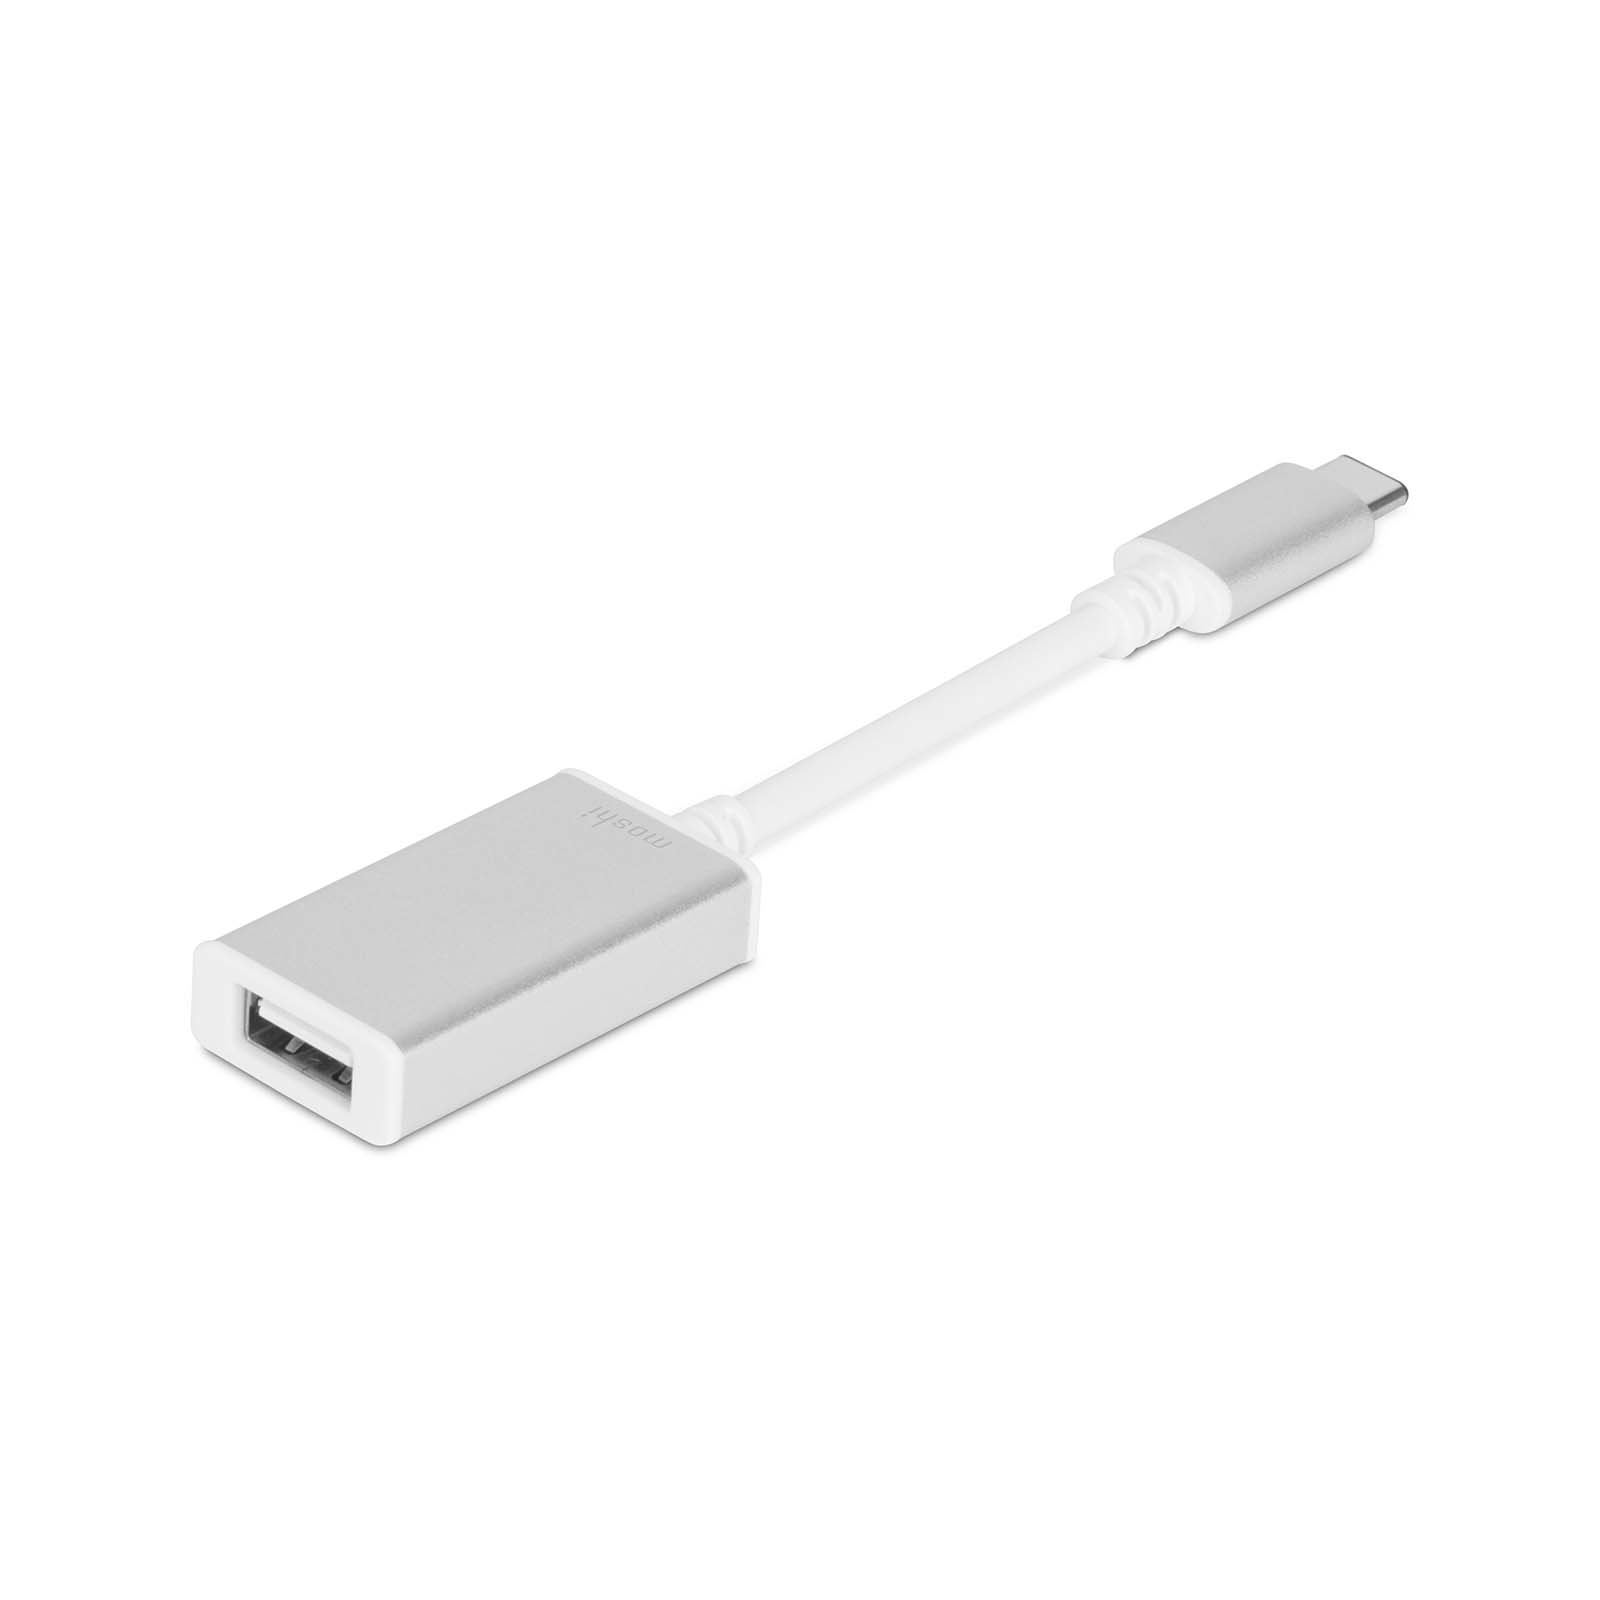 best usb format for mac and pc